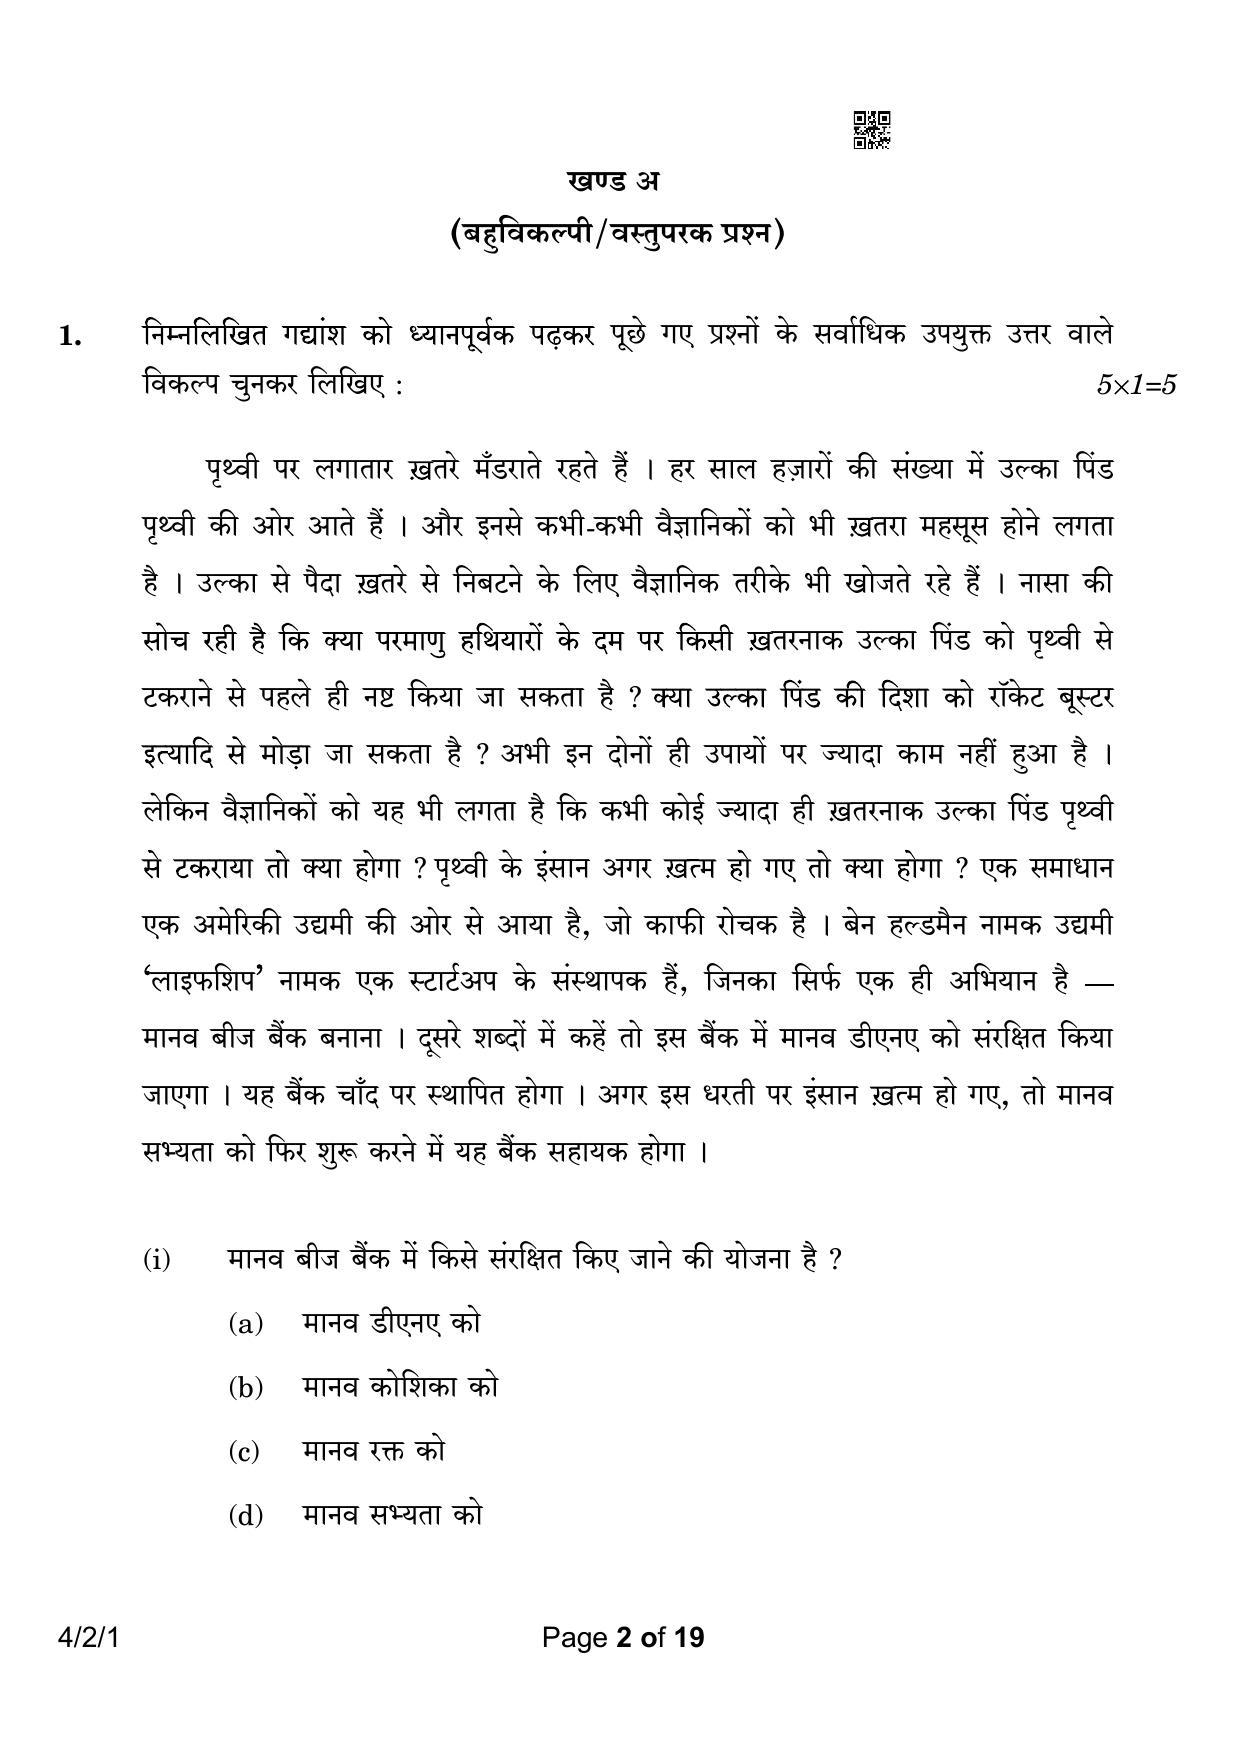 CBSE Class 10 4-2-1 Hindi B 2023 Question Paper - Page 2